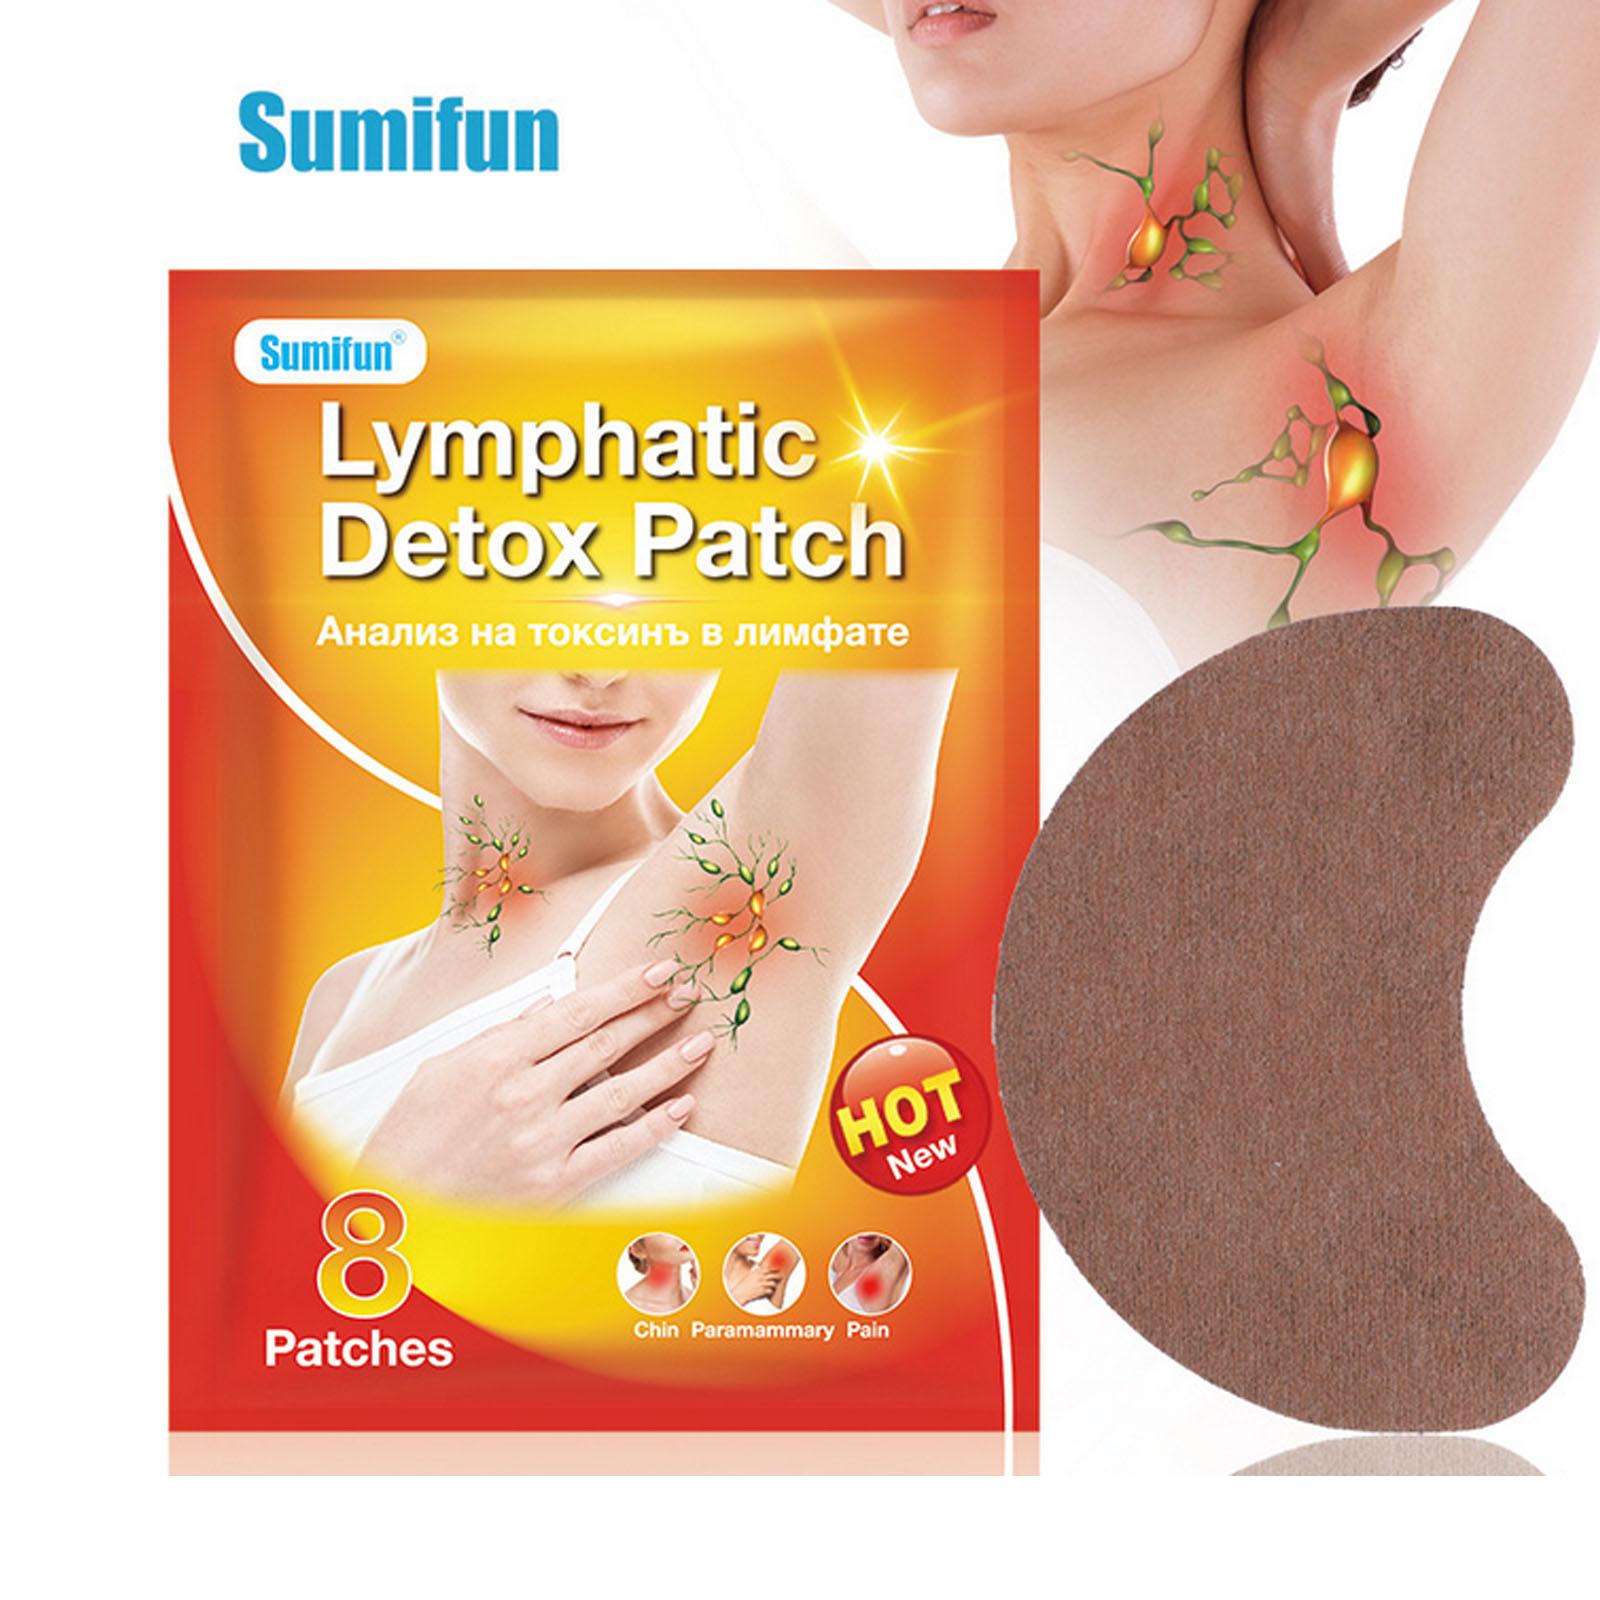 Lymphatic health patch